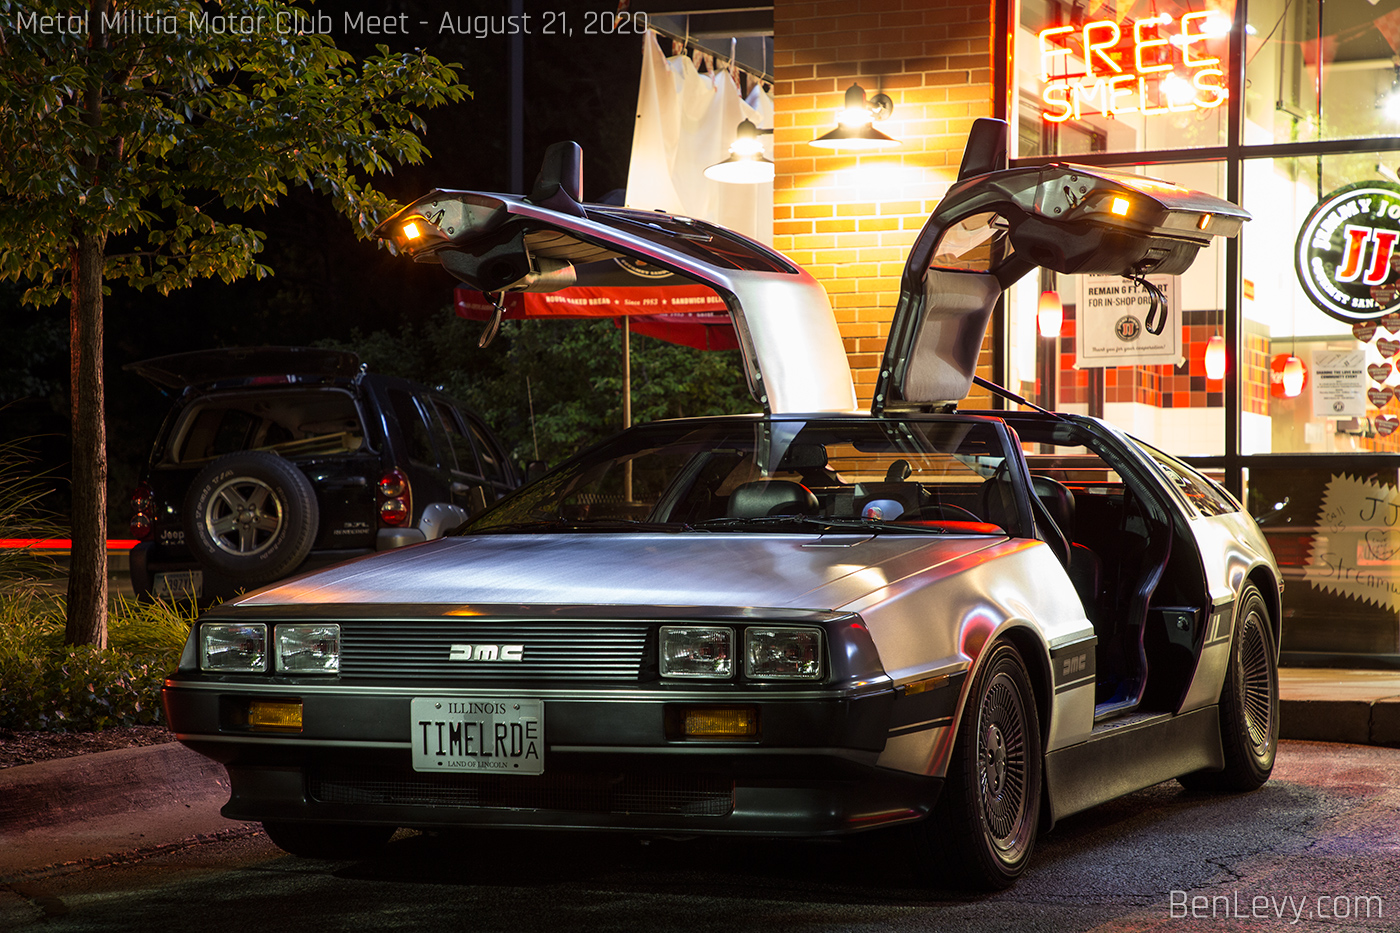 DeLorean DMC-12 parked in front of Jimmy John's